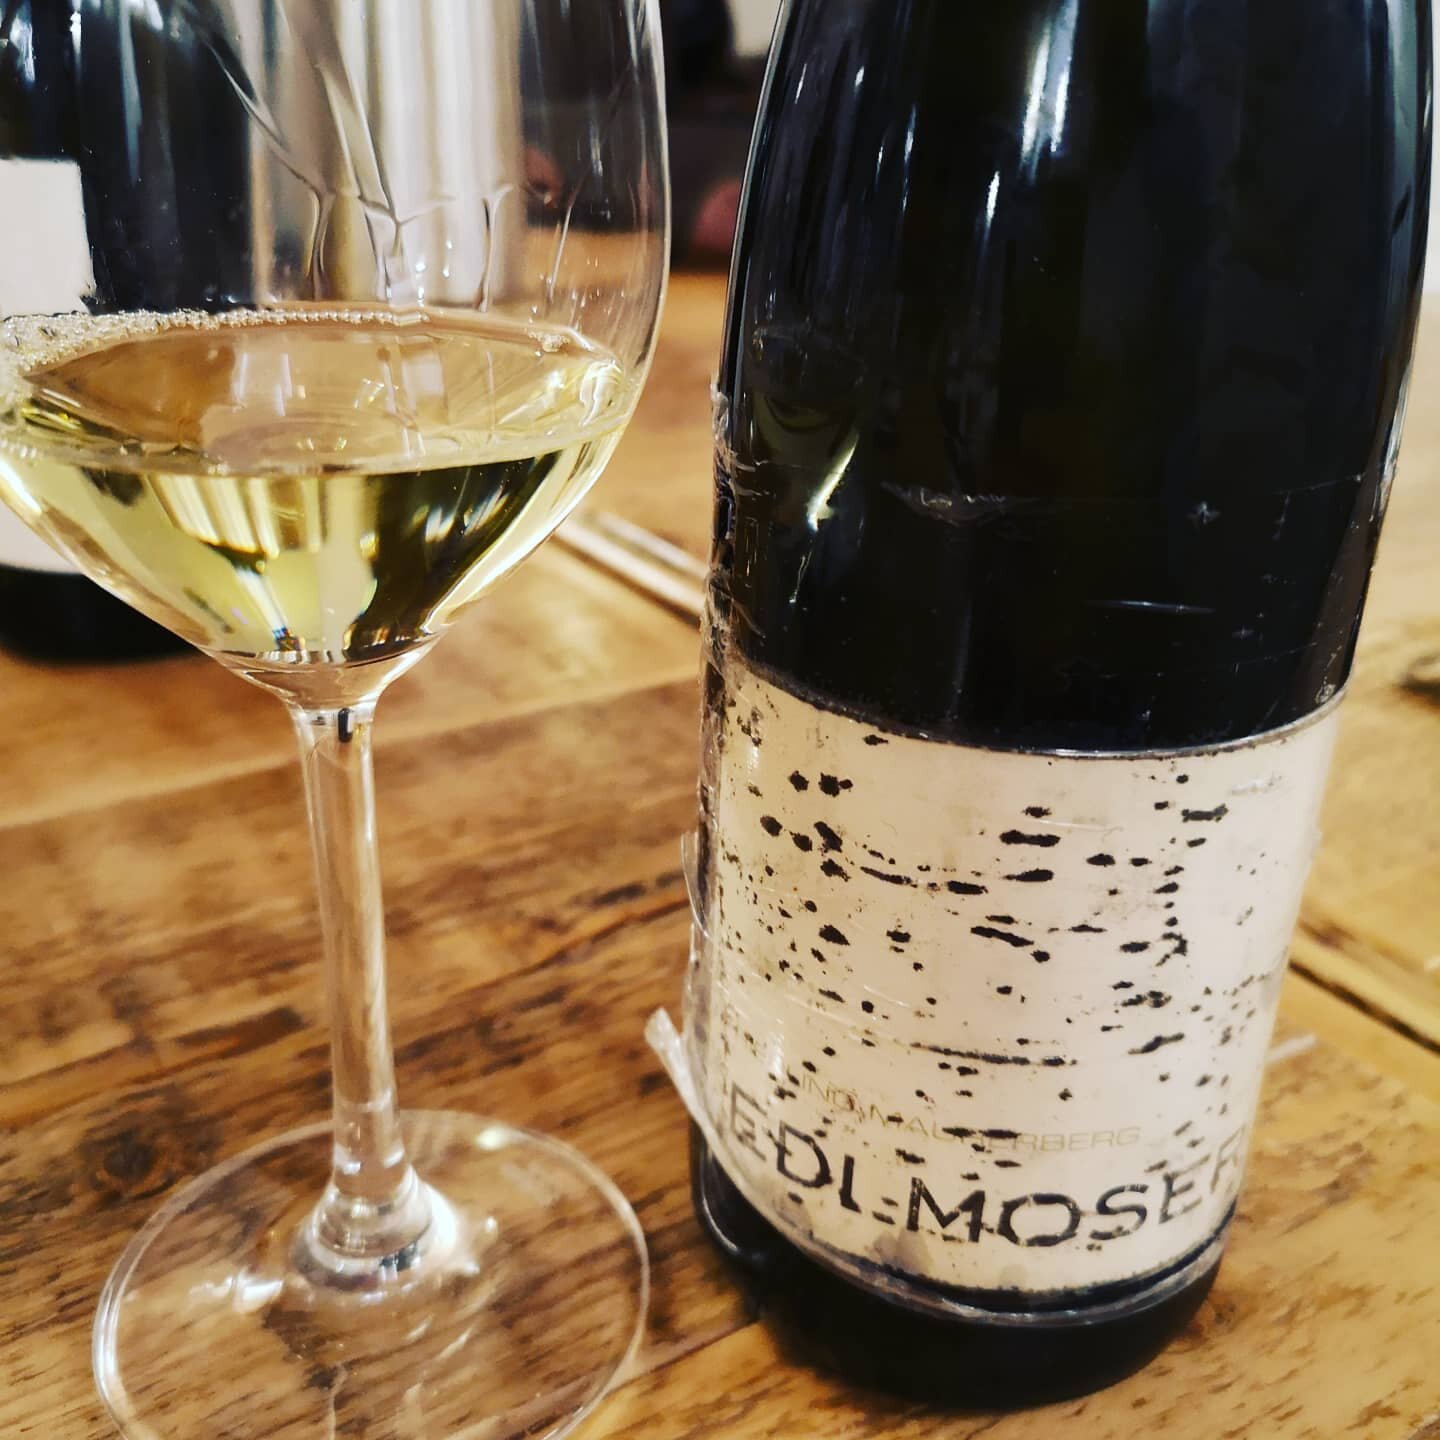 From our September tasting with theme &quot;Wein aus Wien&quot;, we tasted this 2006 Riesling from Weingut  Edlmoser.

Ripe apricot notes, dried peach, sweet resin bread, refreshing acidity balanced with ripe fruit in the palate and lingering afterta